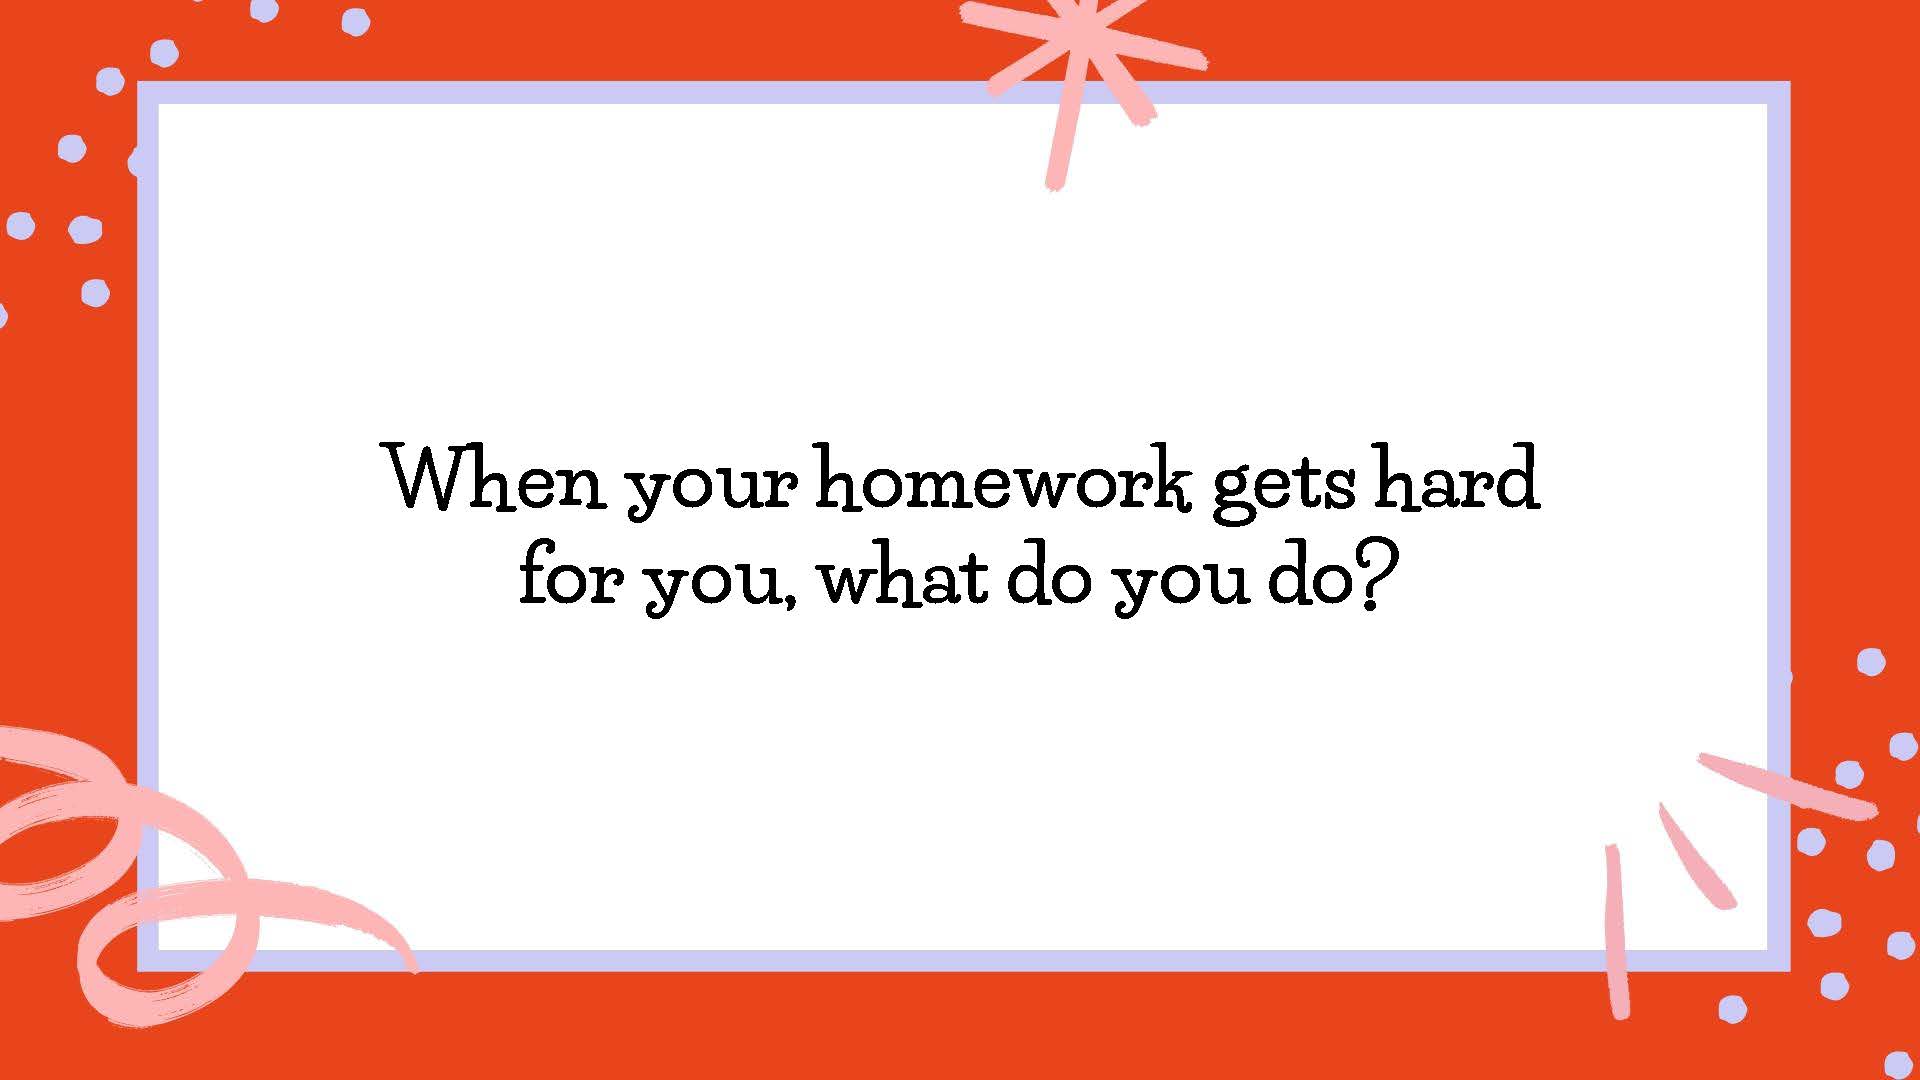 When your homework gets hard for you, what do you do?